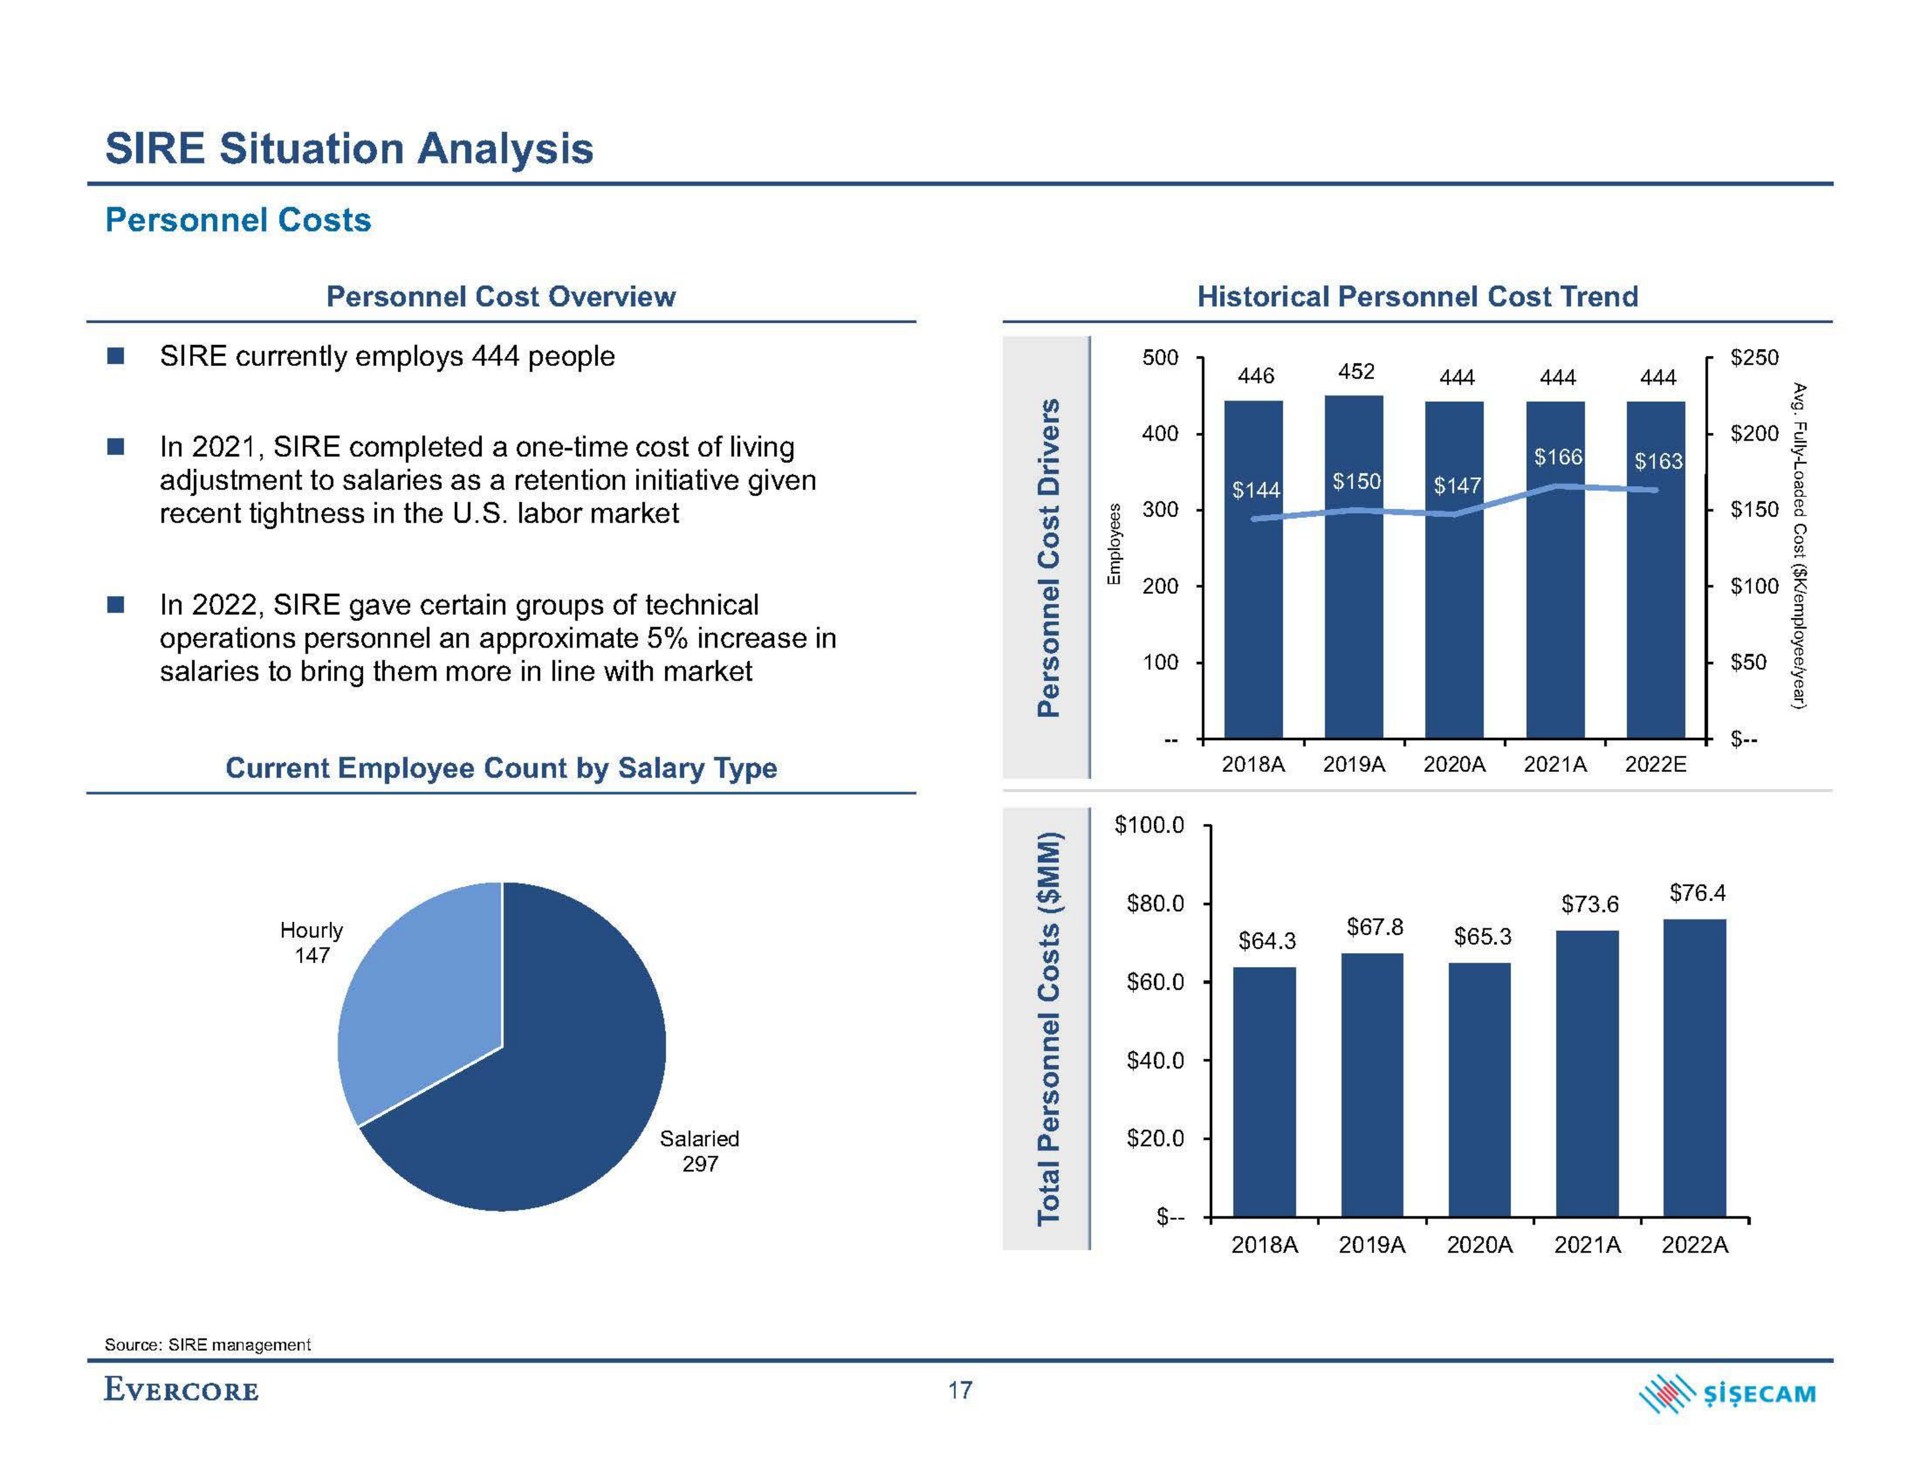 sire situation analysis salaries to bring them more in line with market | Evercore